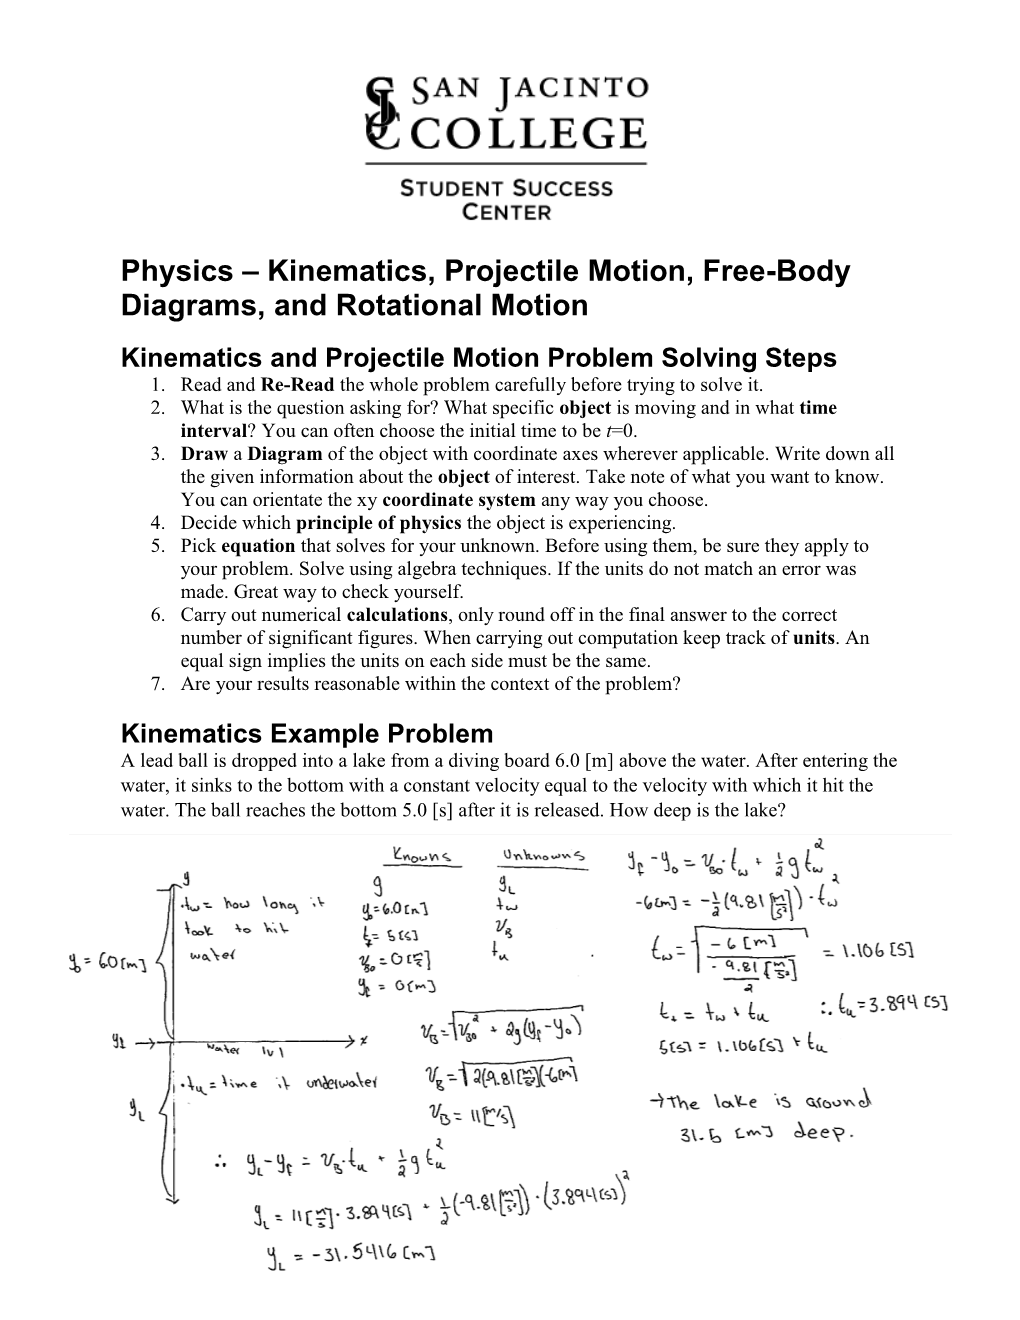 Physics – Kinematics, Projectile Motion, Free-Body Diagrams, and Rotational Motion Kinematics and Projectile Motion Problem Solving Steps 1